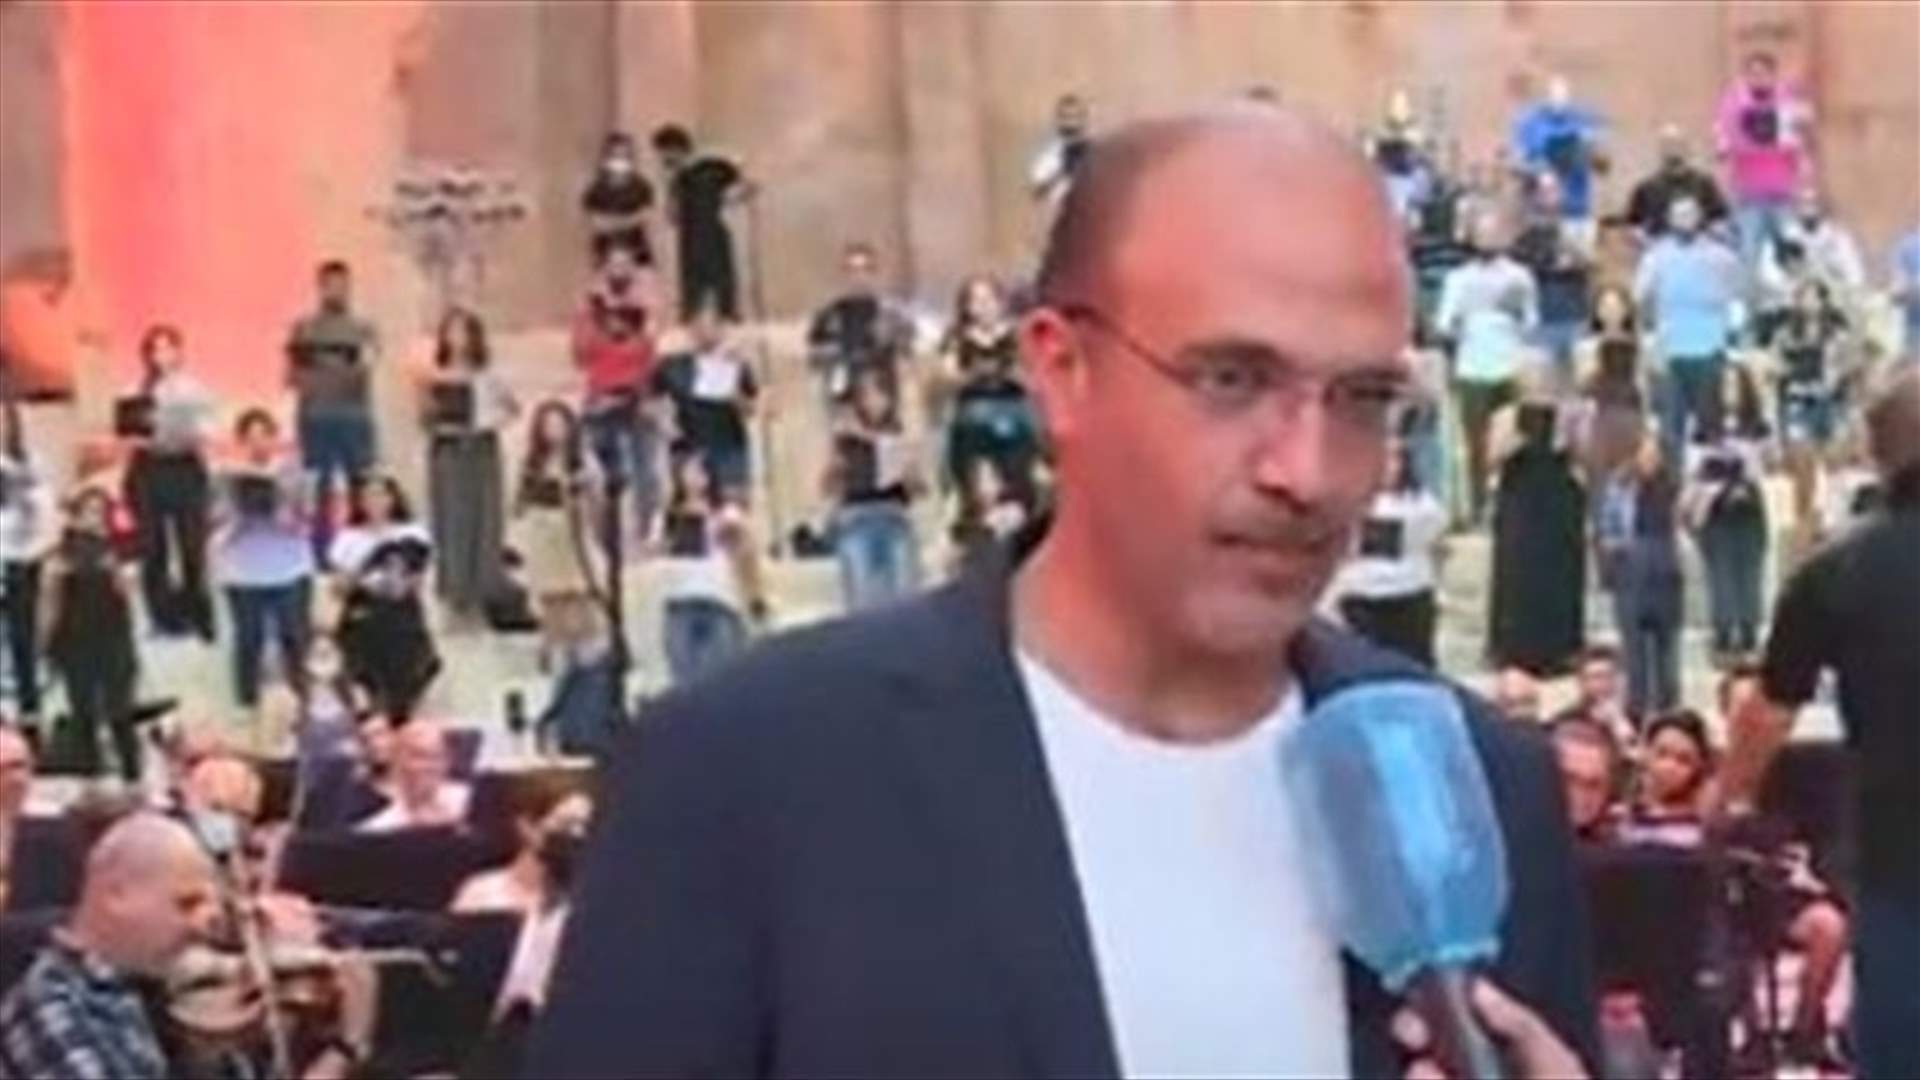 Minister of Health inspects preparations ahead of Baalbek concert